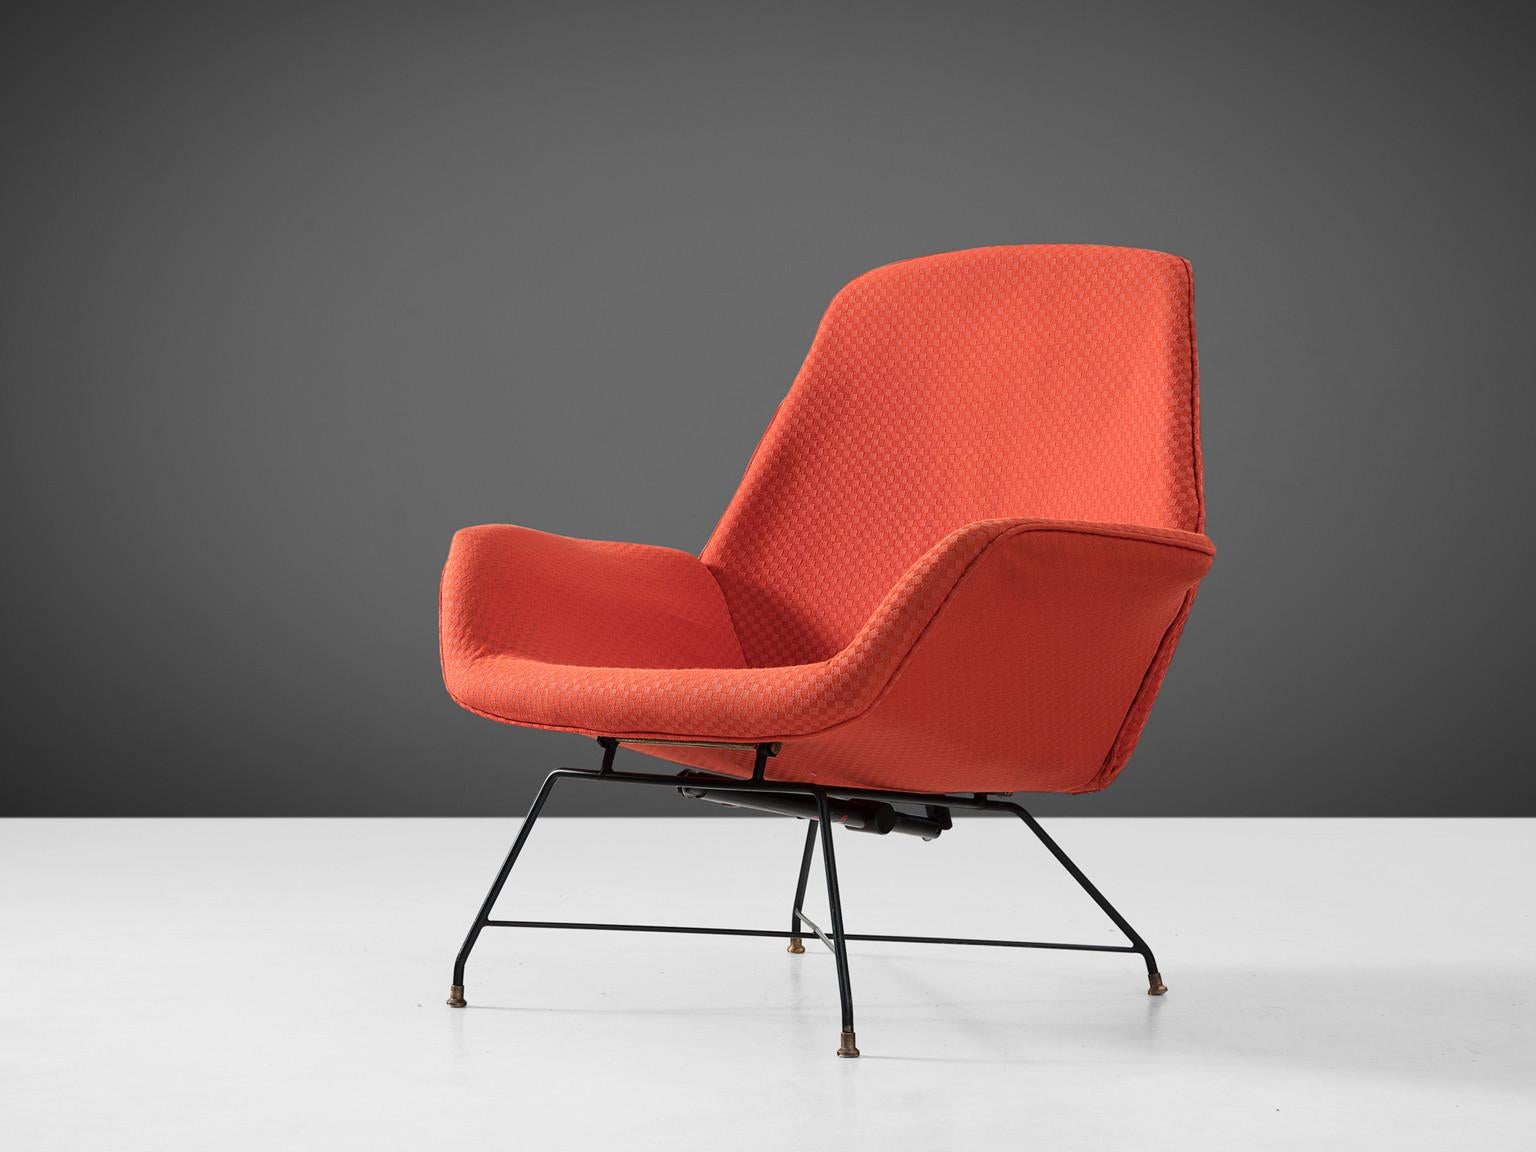 Augusto Bozzi for Saporiti, lounge chair, coated iron, brass, fabric, Italy, 1950s 

A streamlined armchair conceived by Augusto Bozzi for Saporiti in the fifties. This particular model enhances the chair's rarity. The chair features a shell-shaped